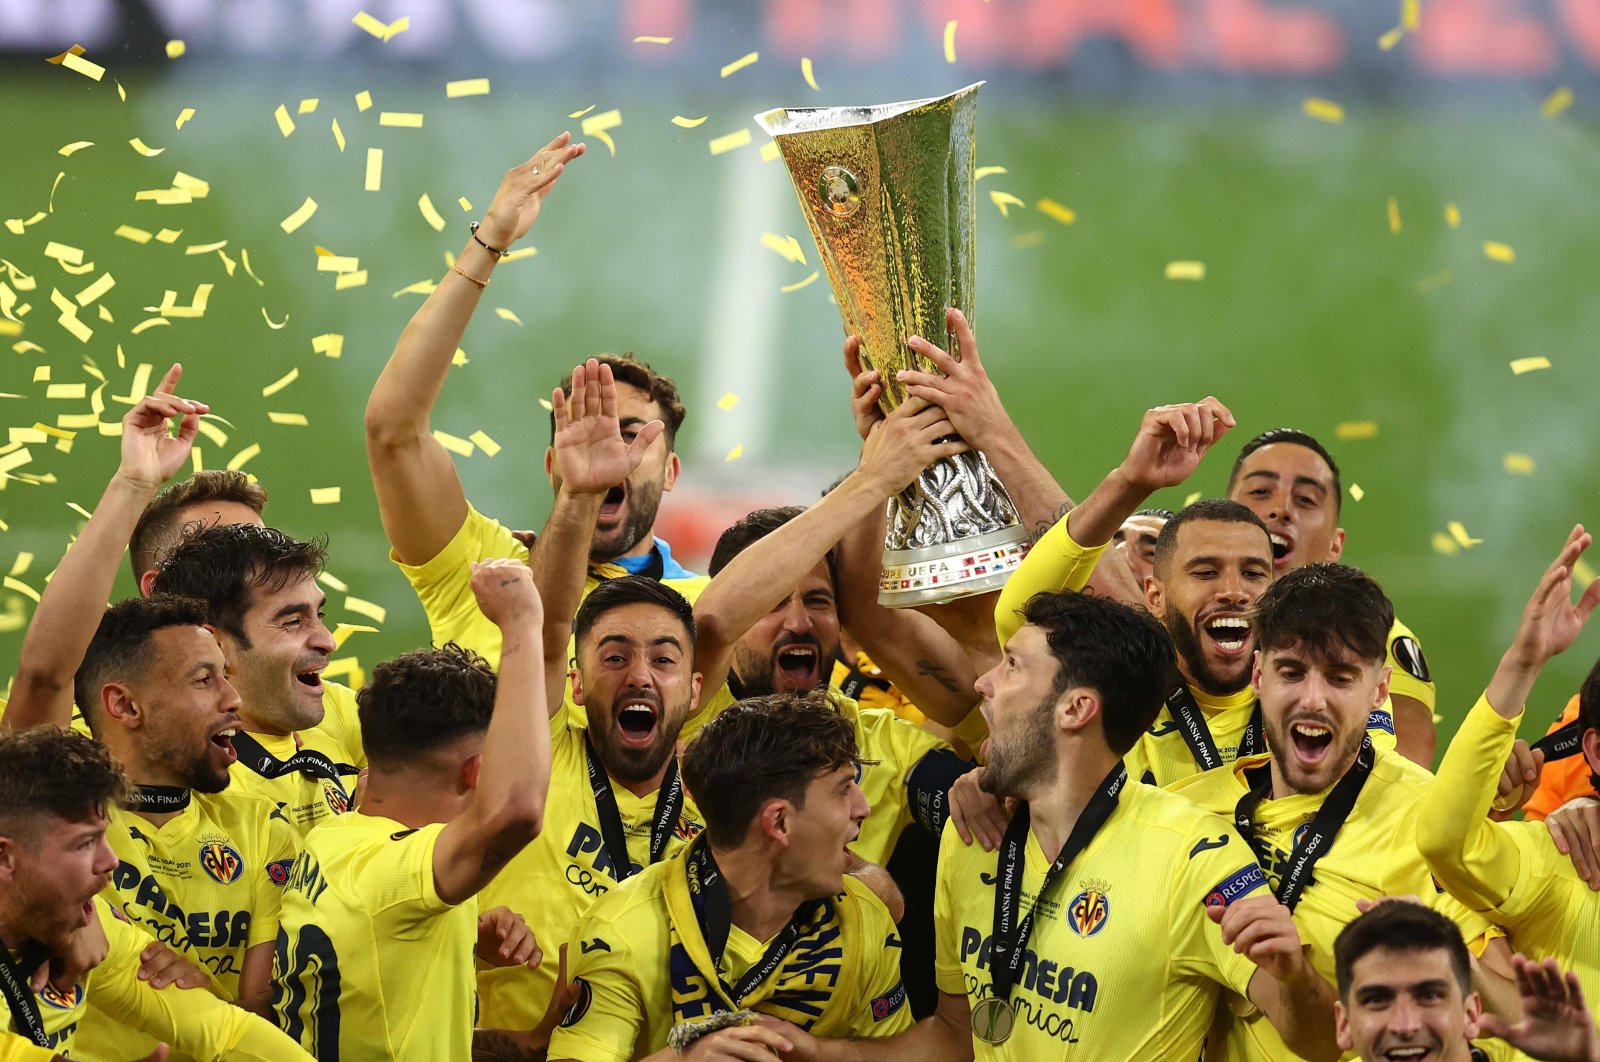 Villarreal players lift UEFA Europa League trophy after beating Manchester United in the final at the Gdansk Stadium, Gdansk, Poland, May 26, 2021. (AFP Photo)